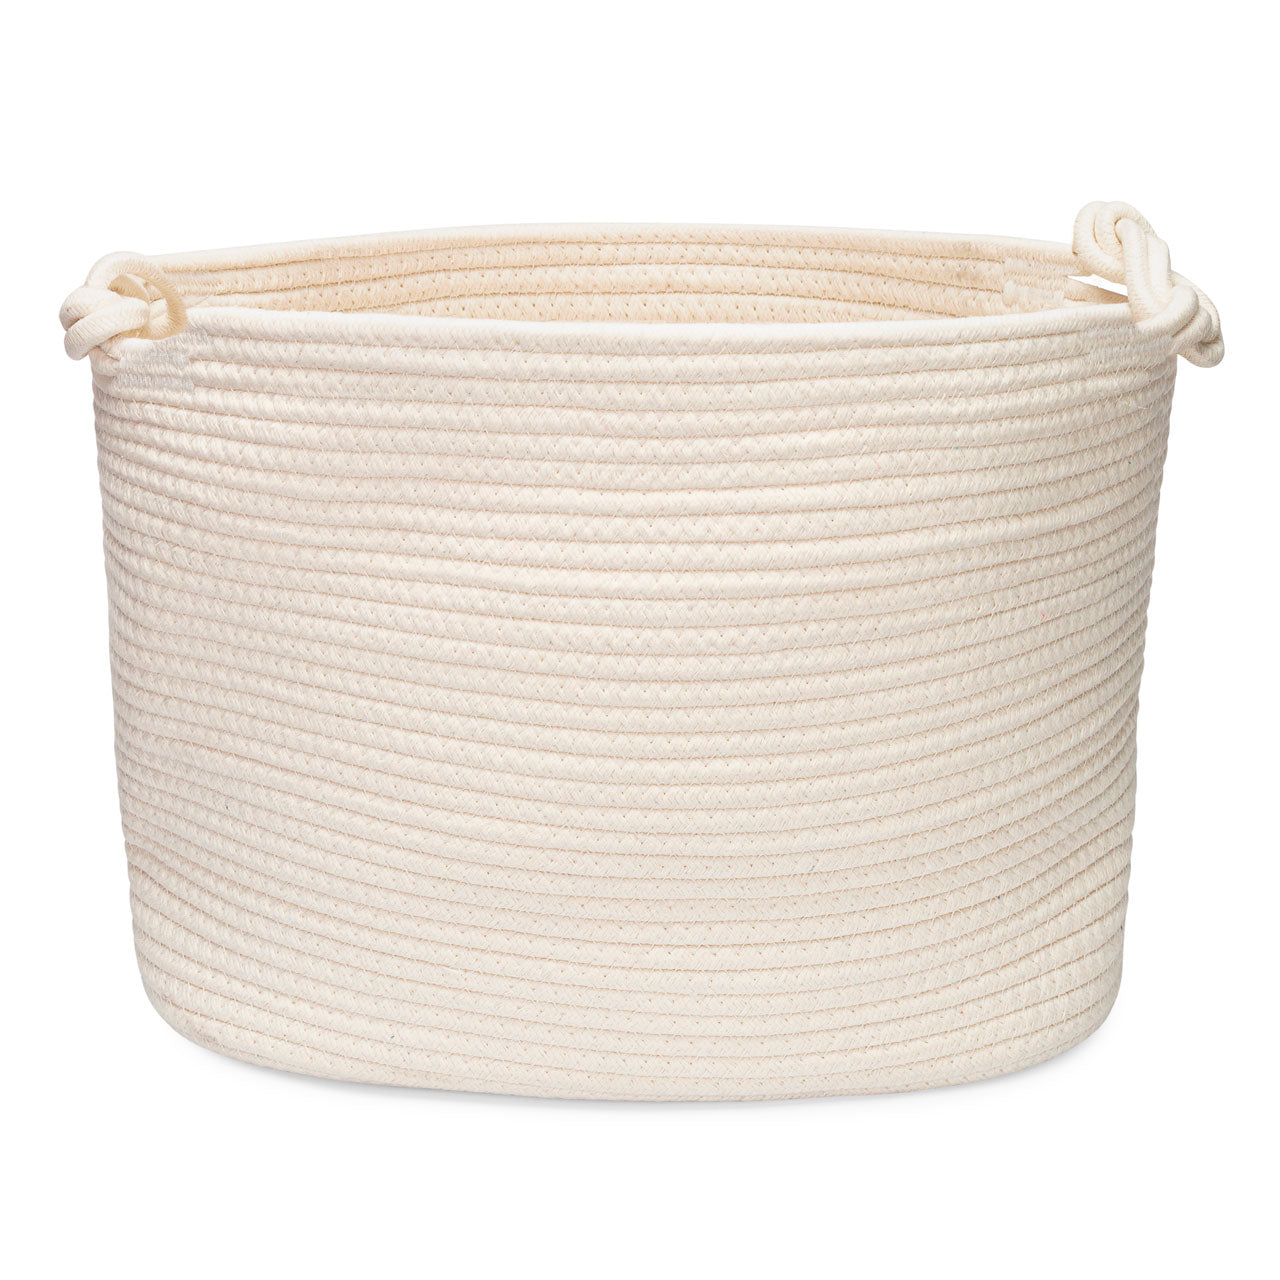 Parker Baby Co. Rope Storage Cube Bin - White